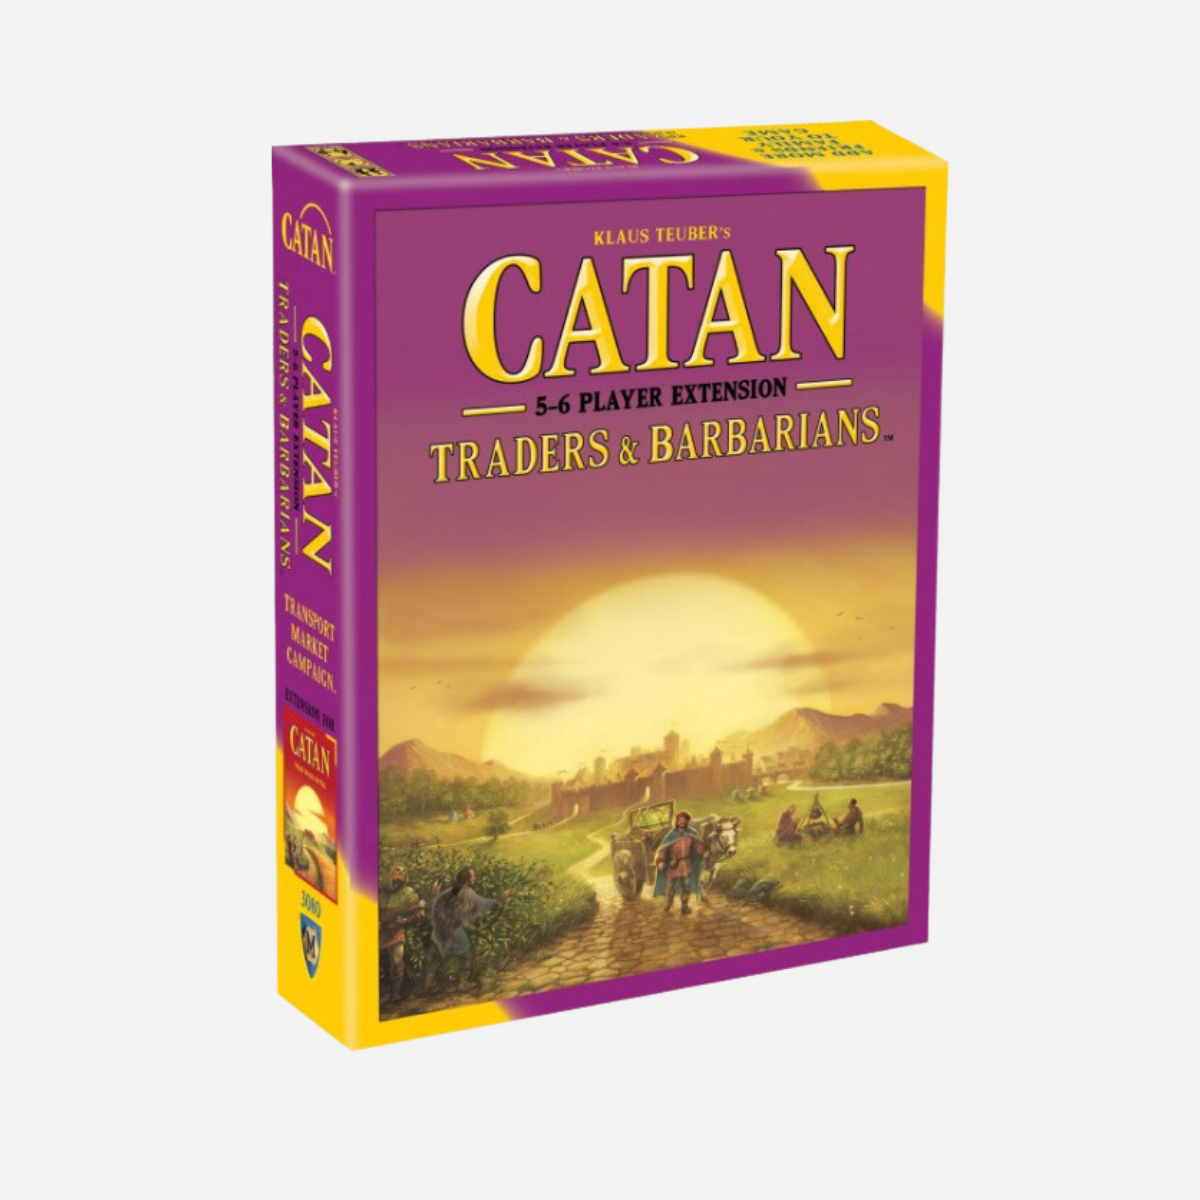 Catan Traders & Barbarians 5-6 Player Extension 5th Edition